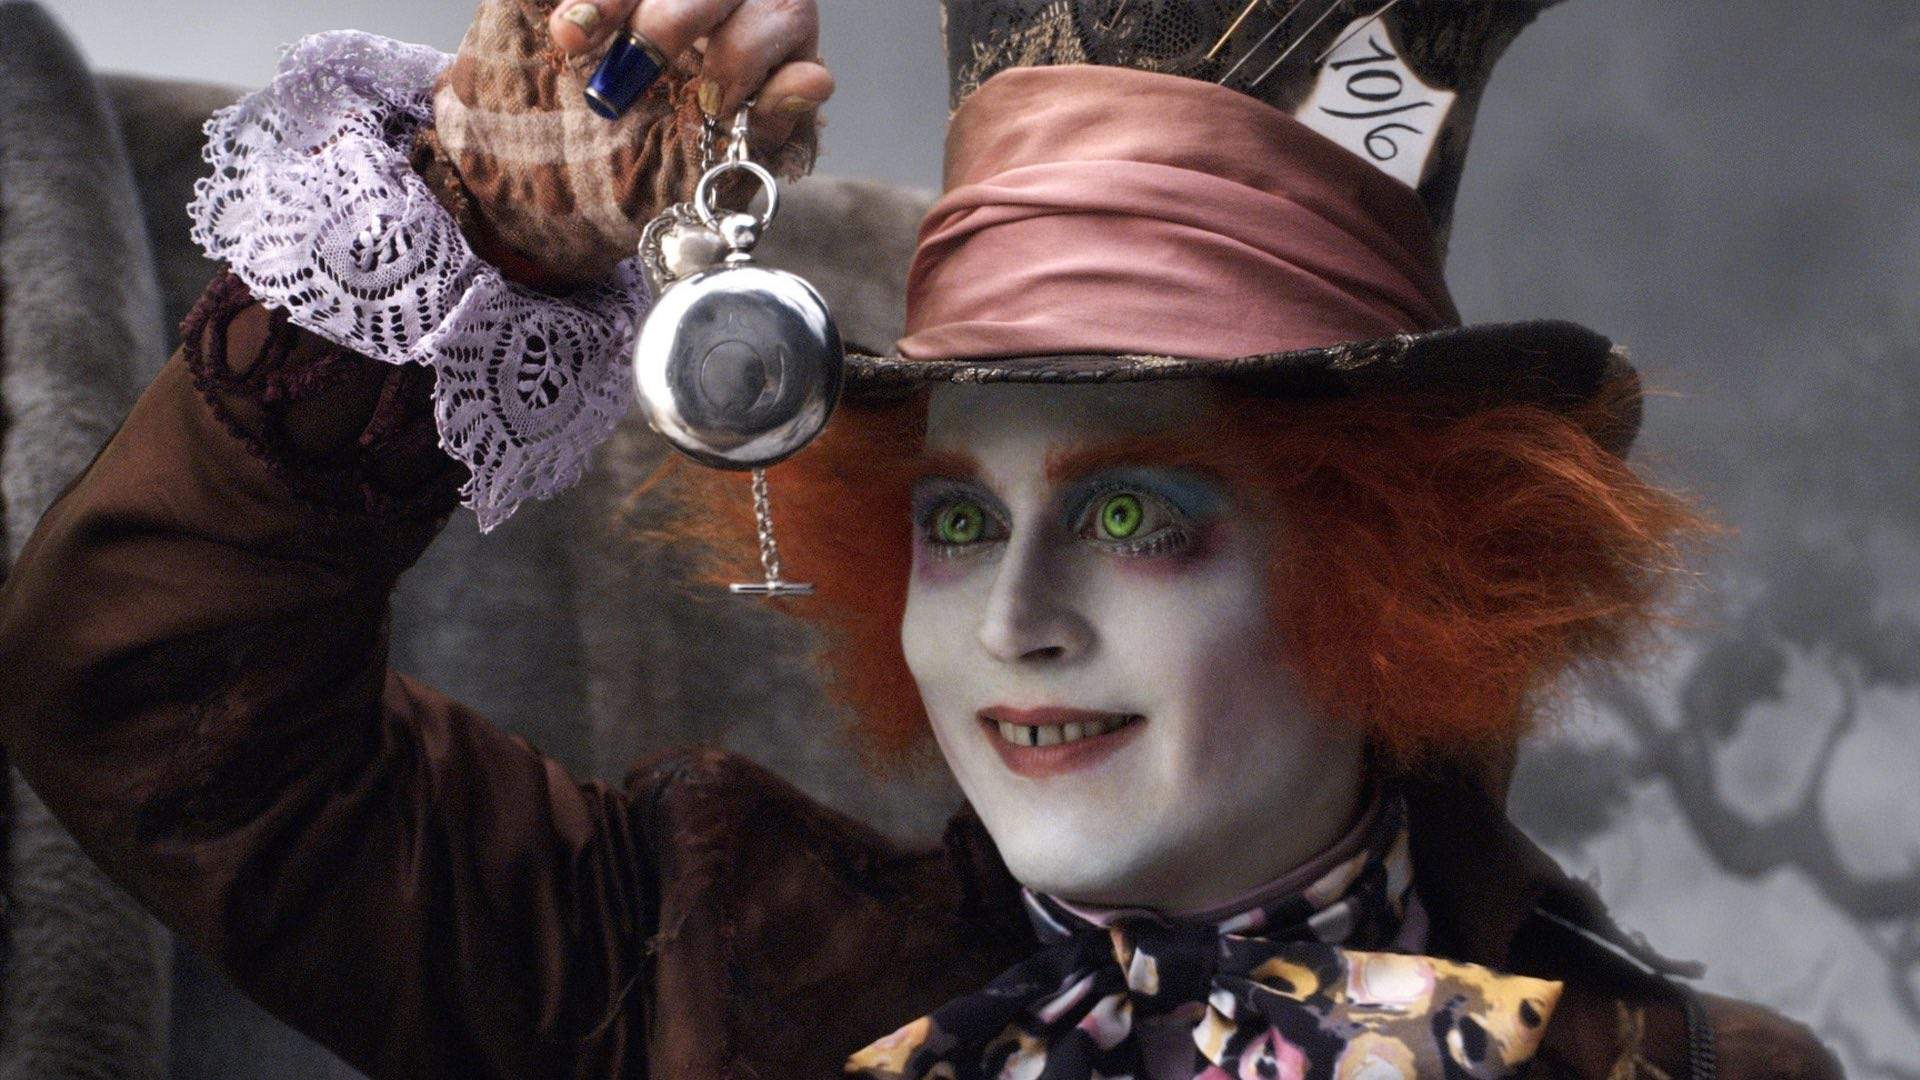 This Immersive Film Experience Will Recreate the 'Alice in Wonderland' Mad Hatter's Tea Party